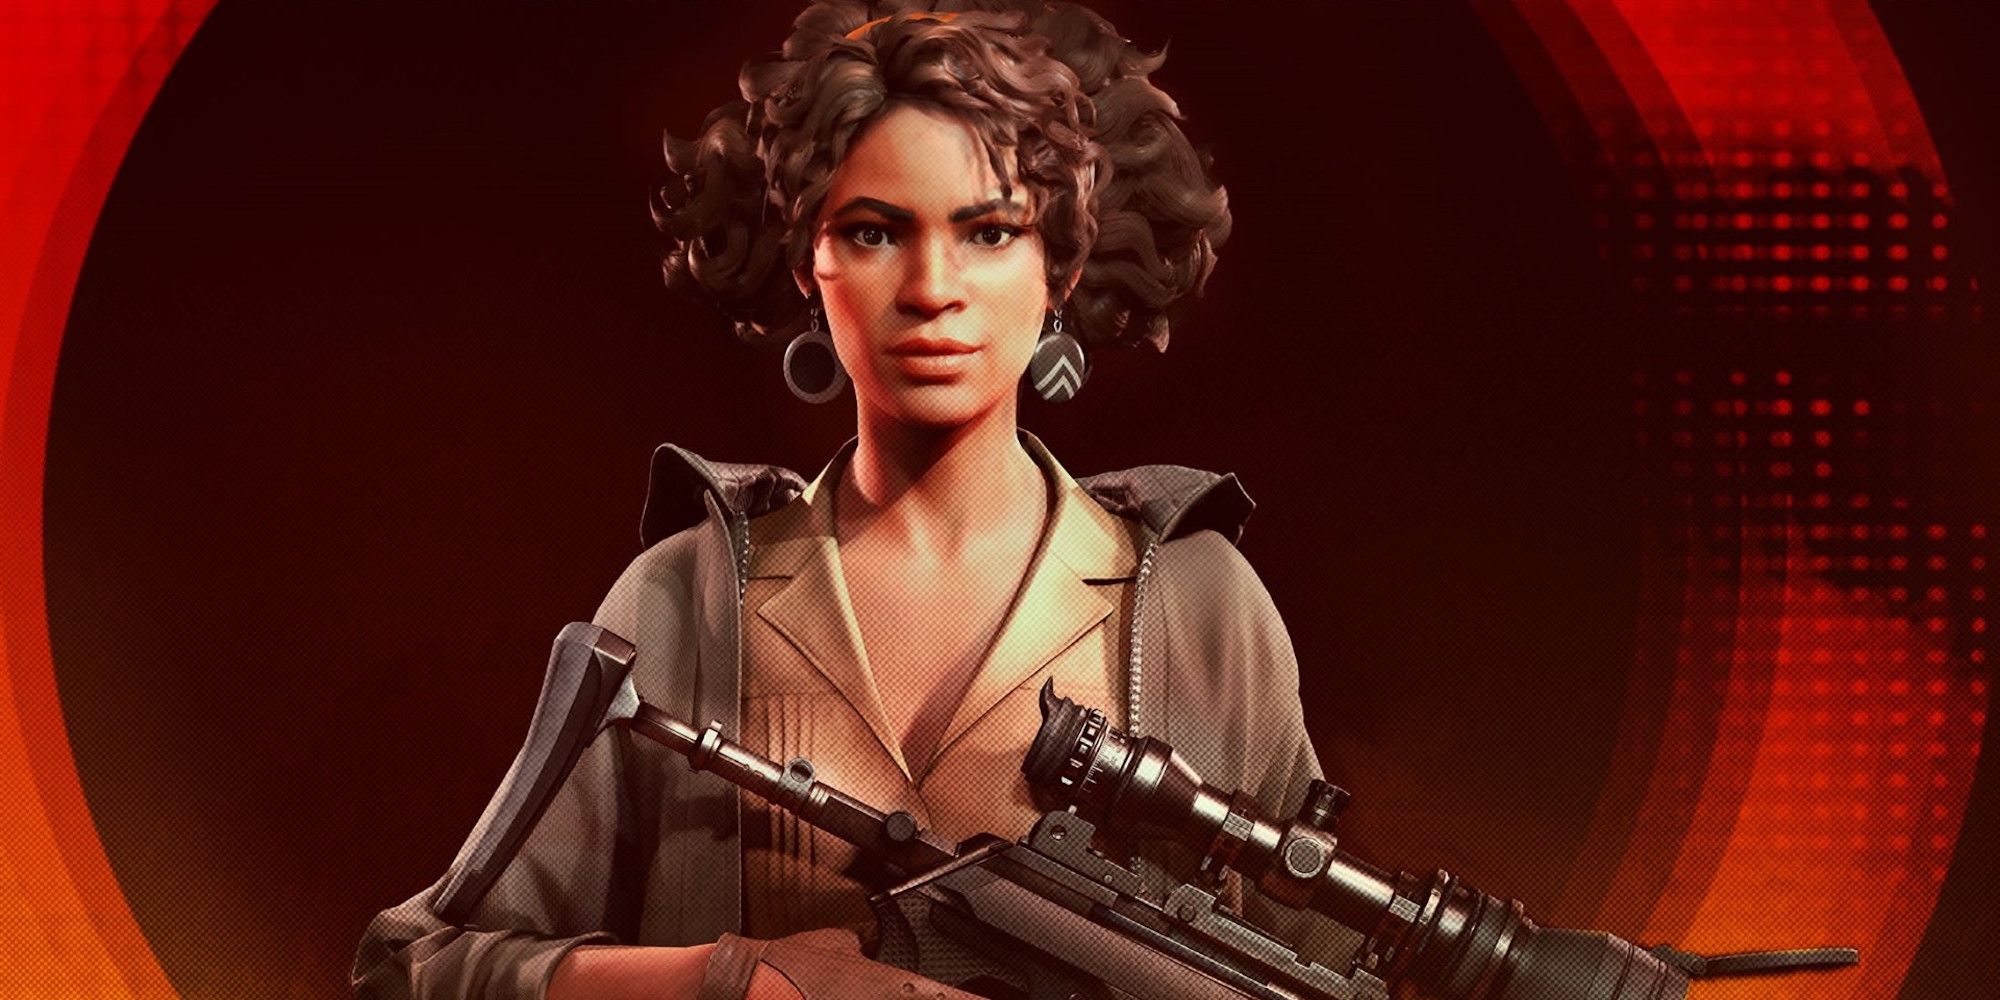 Julianna from Deathloop stares into the camera while holding a sniper rifle